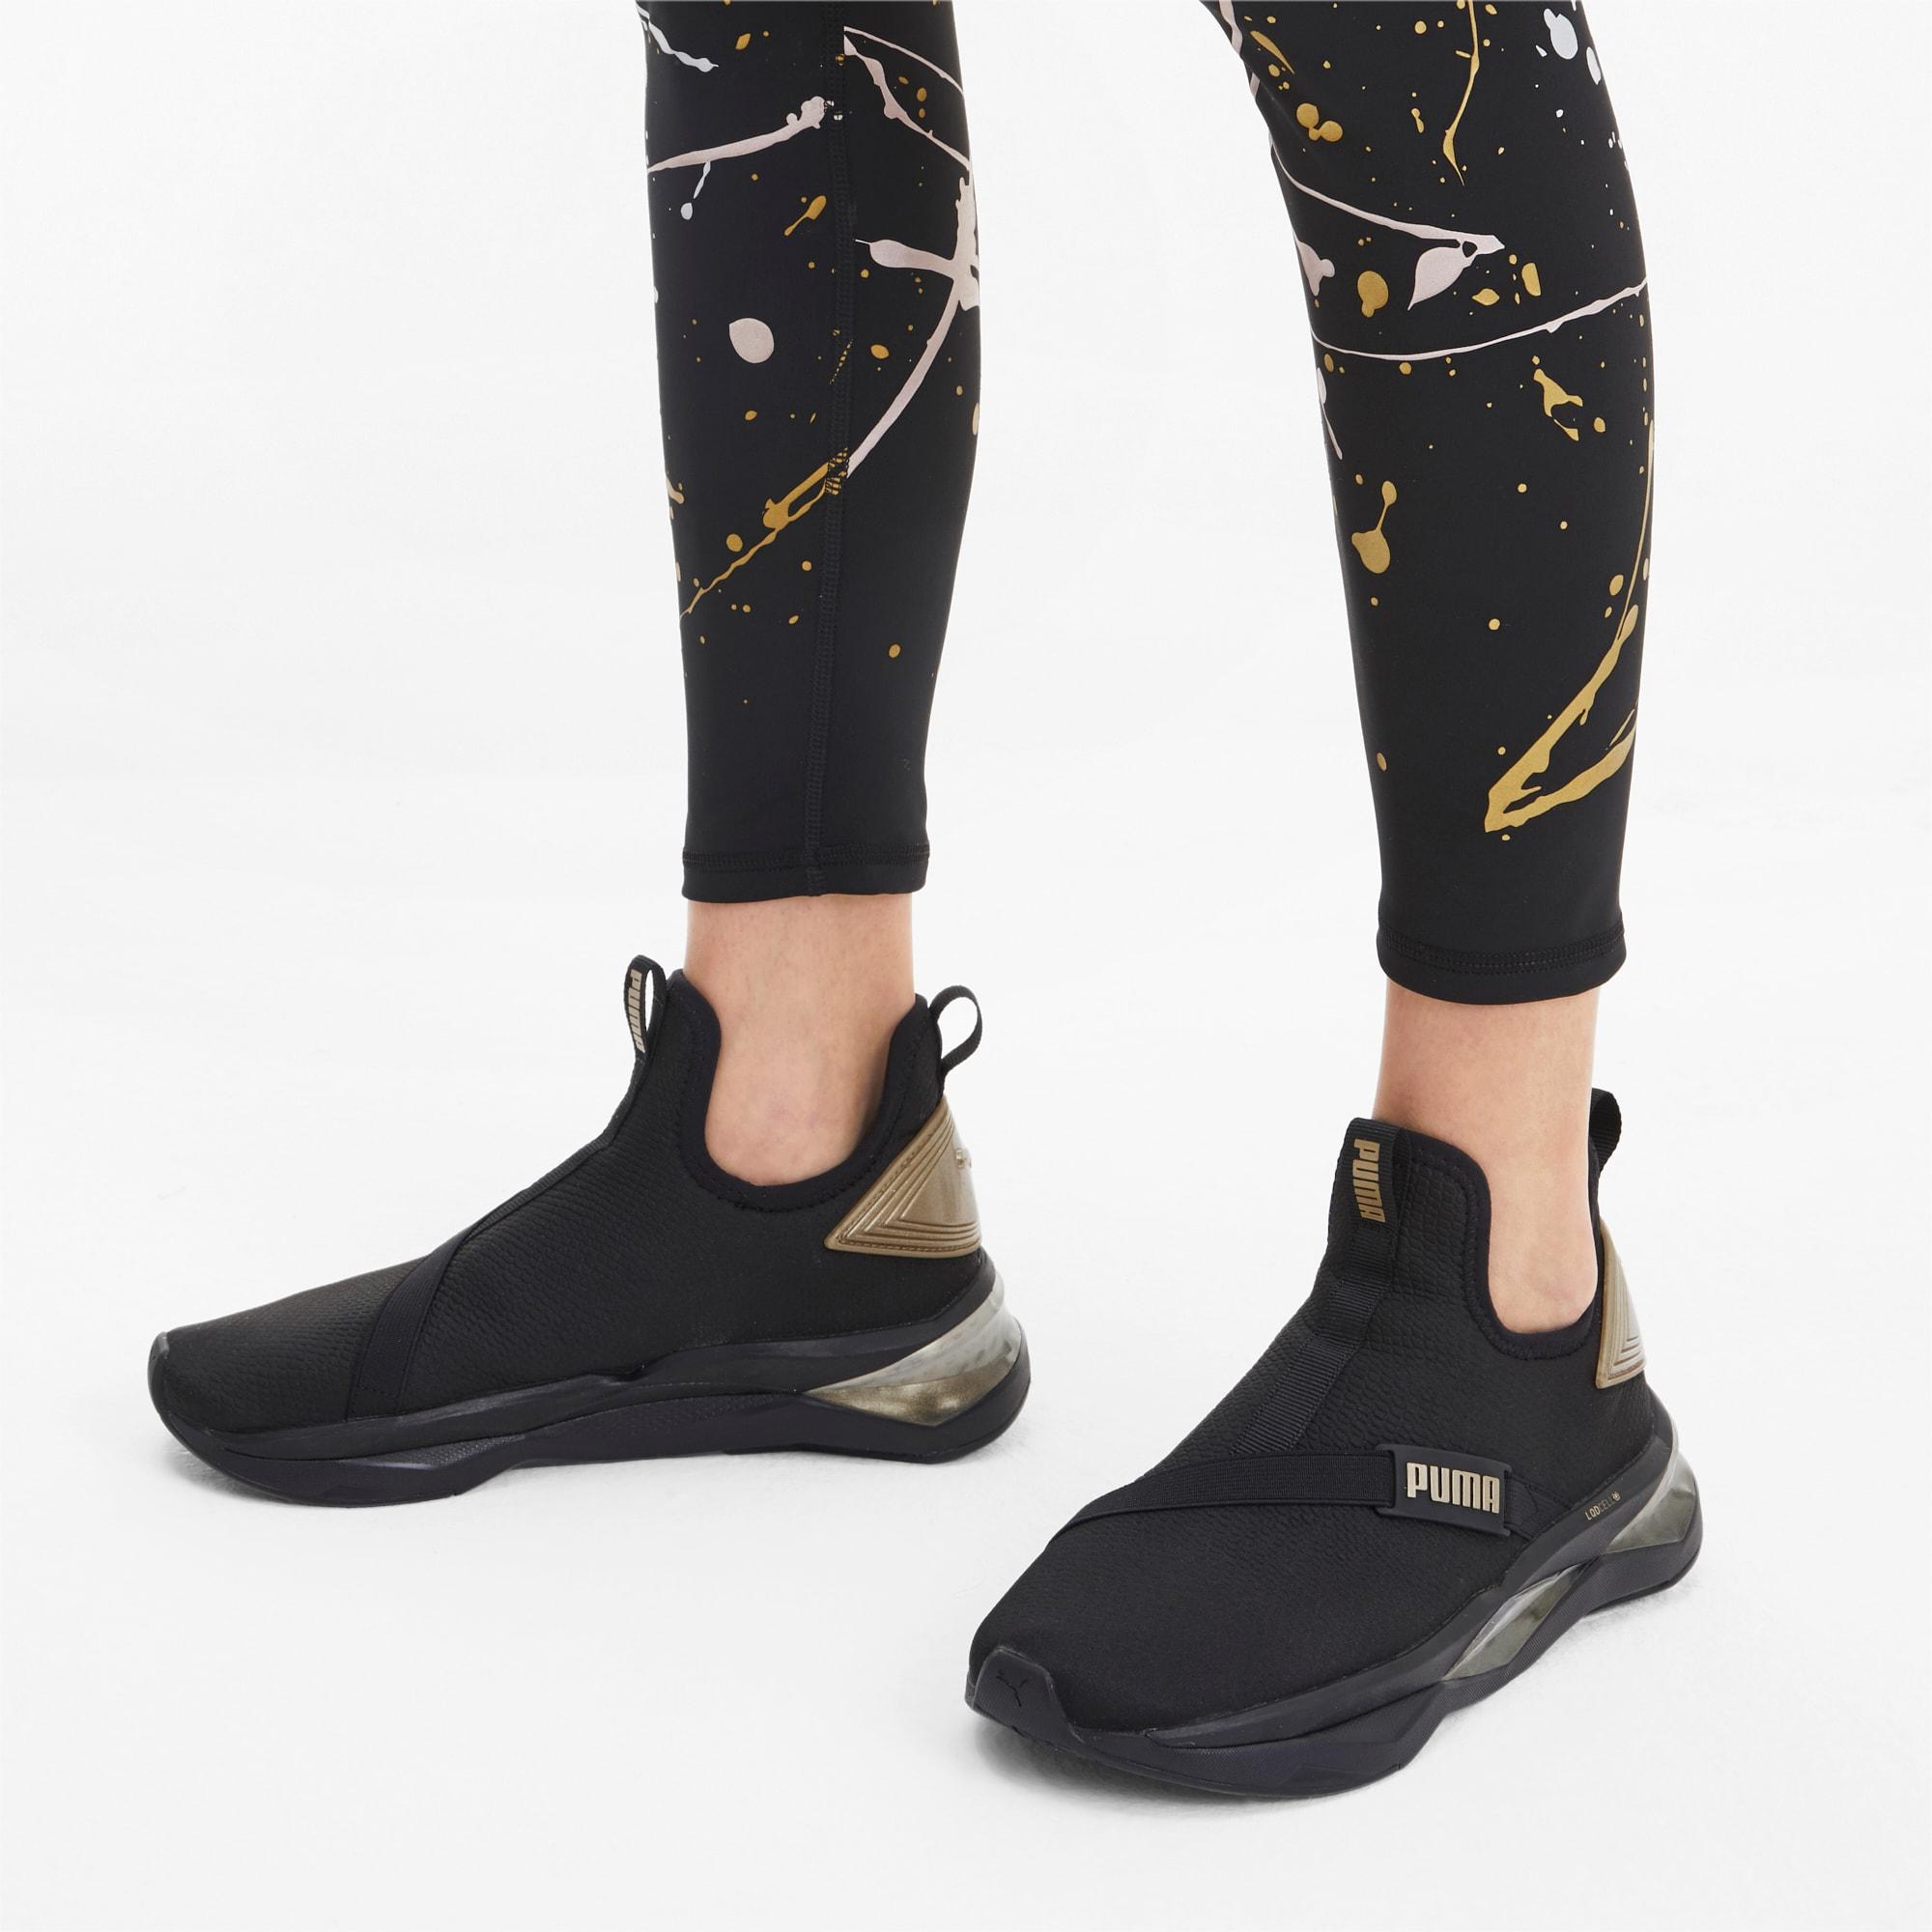 PUMA Lace Lqdcell Shatter Mid Training Shoes in Black/Gold Metallic (Black)  - Lyst